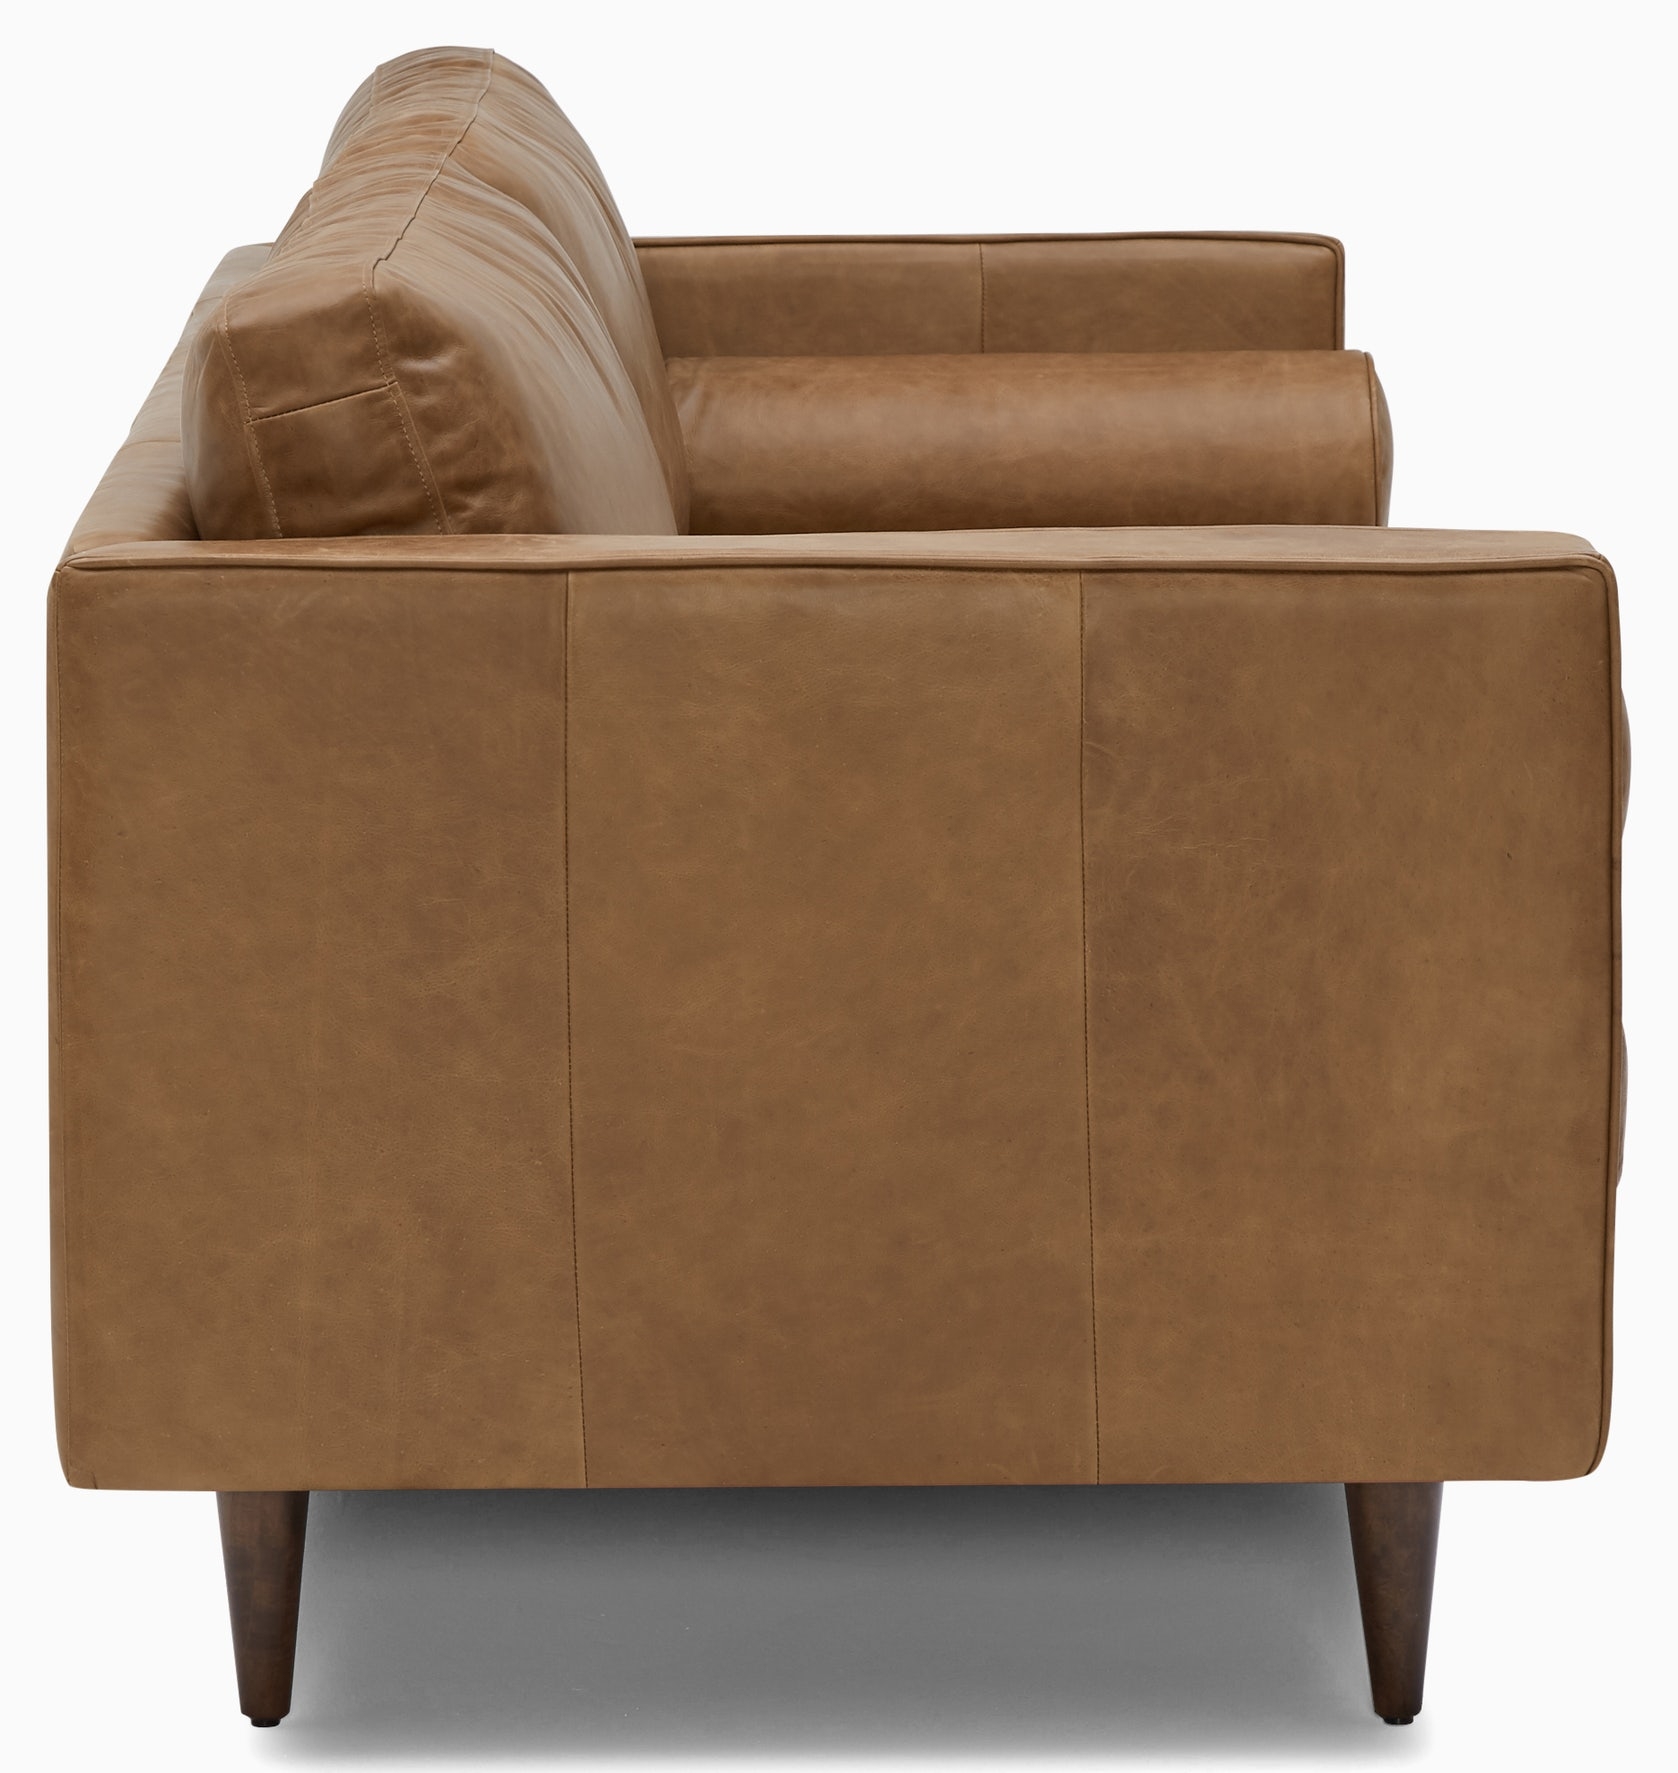 Briar Leather Sofa in Santiago Ale with Mocha wood stain - Image 2